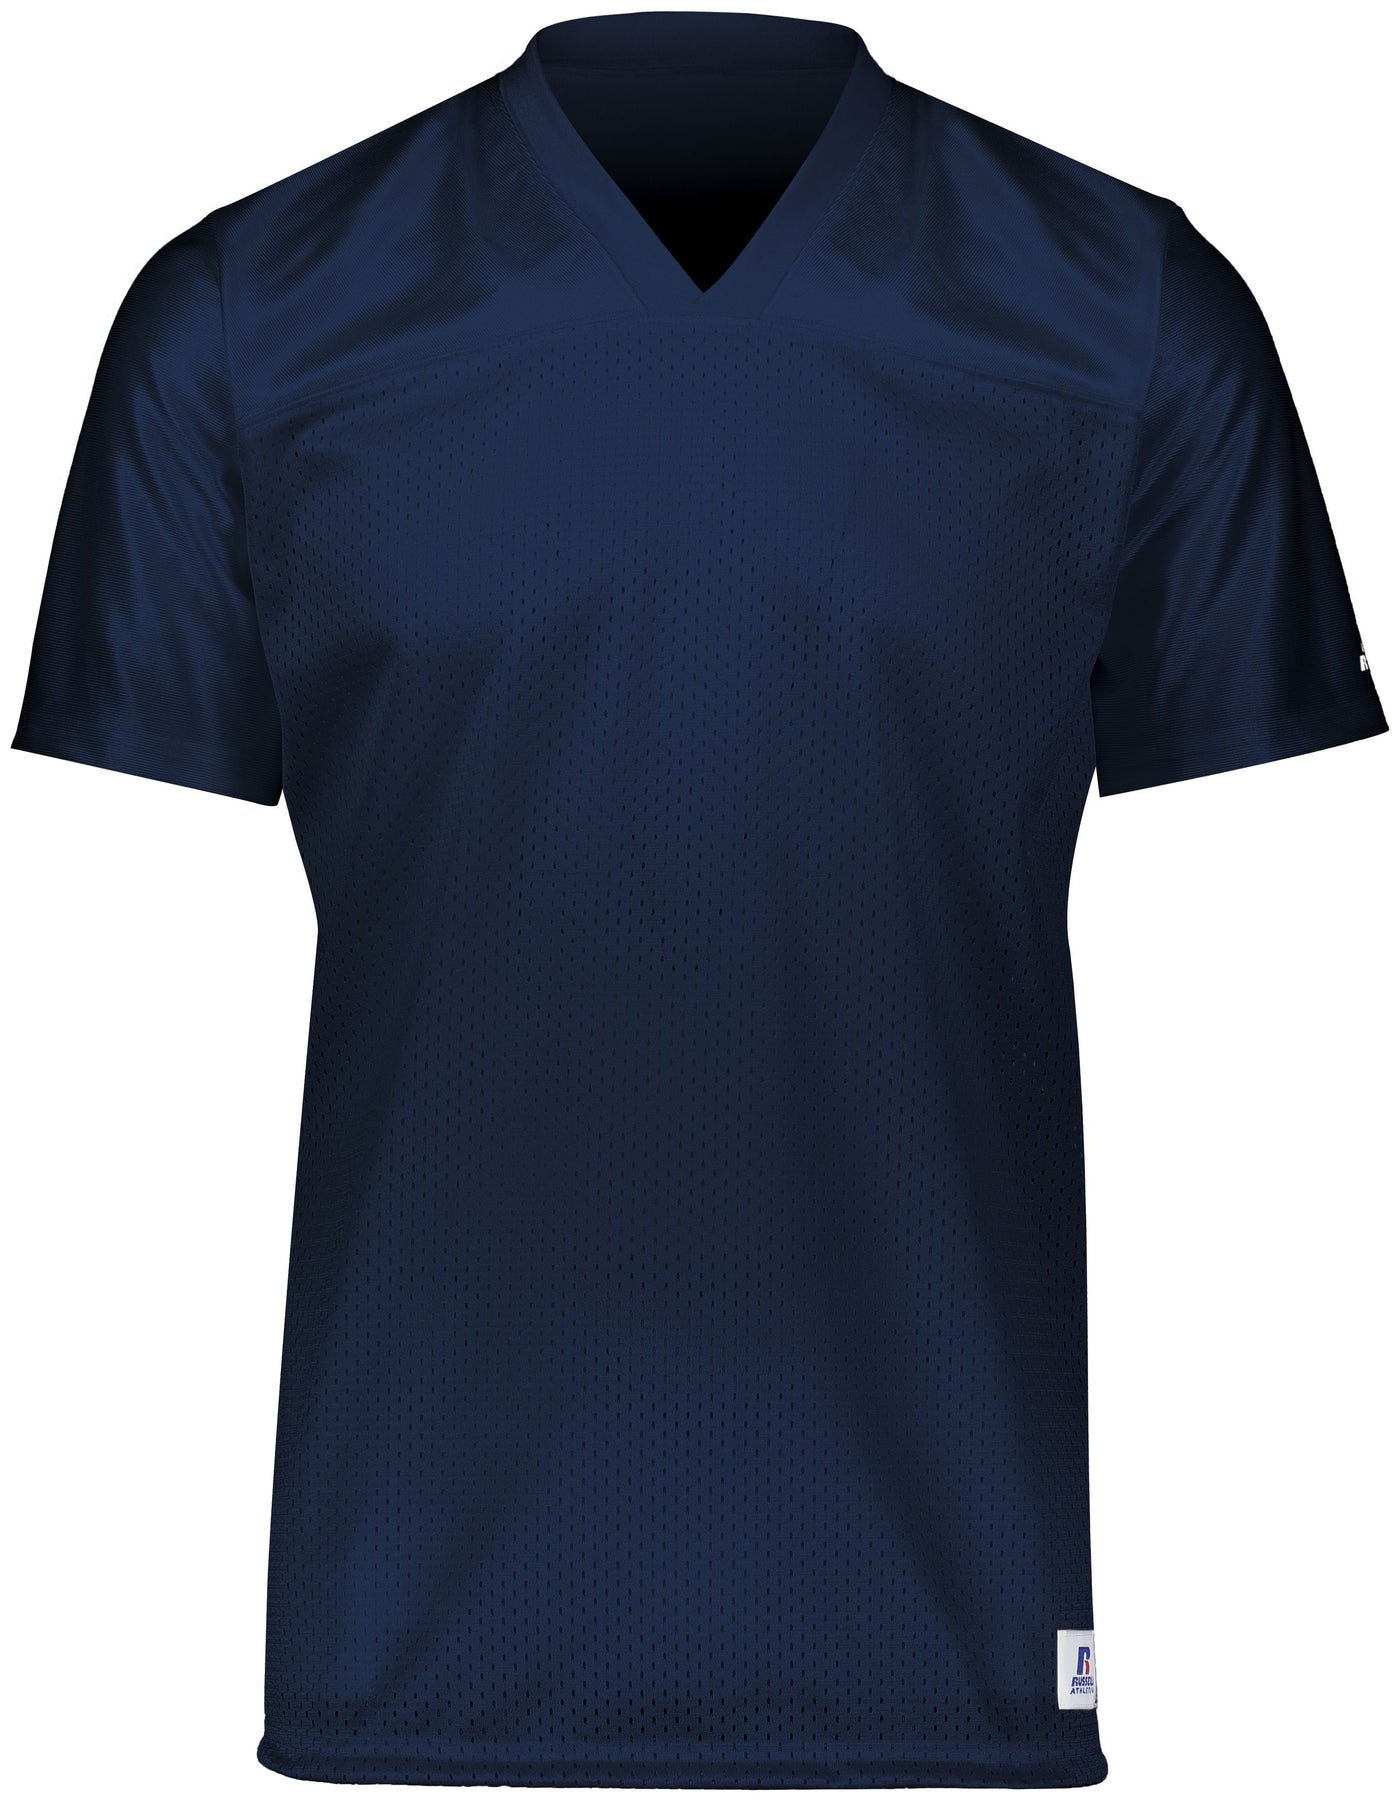 Solid Navy Flag Football Jersey